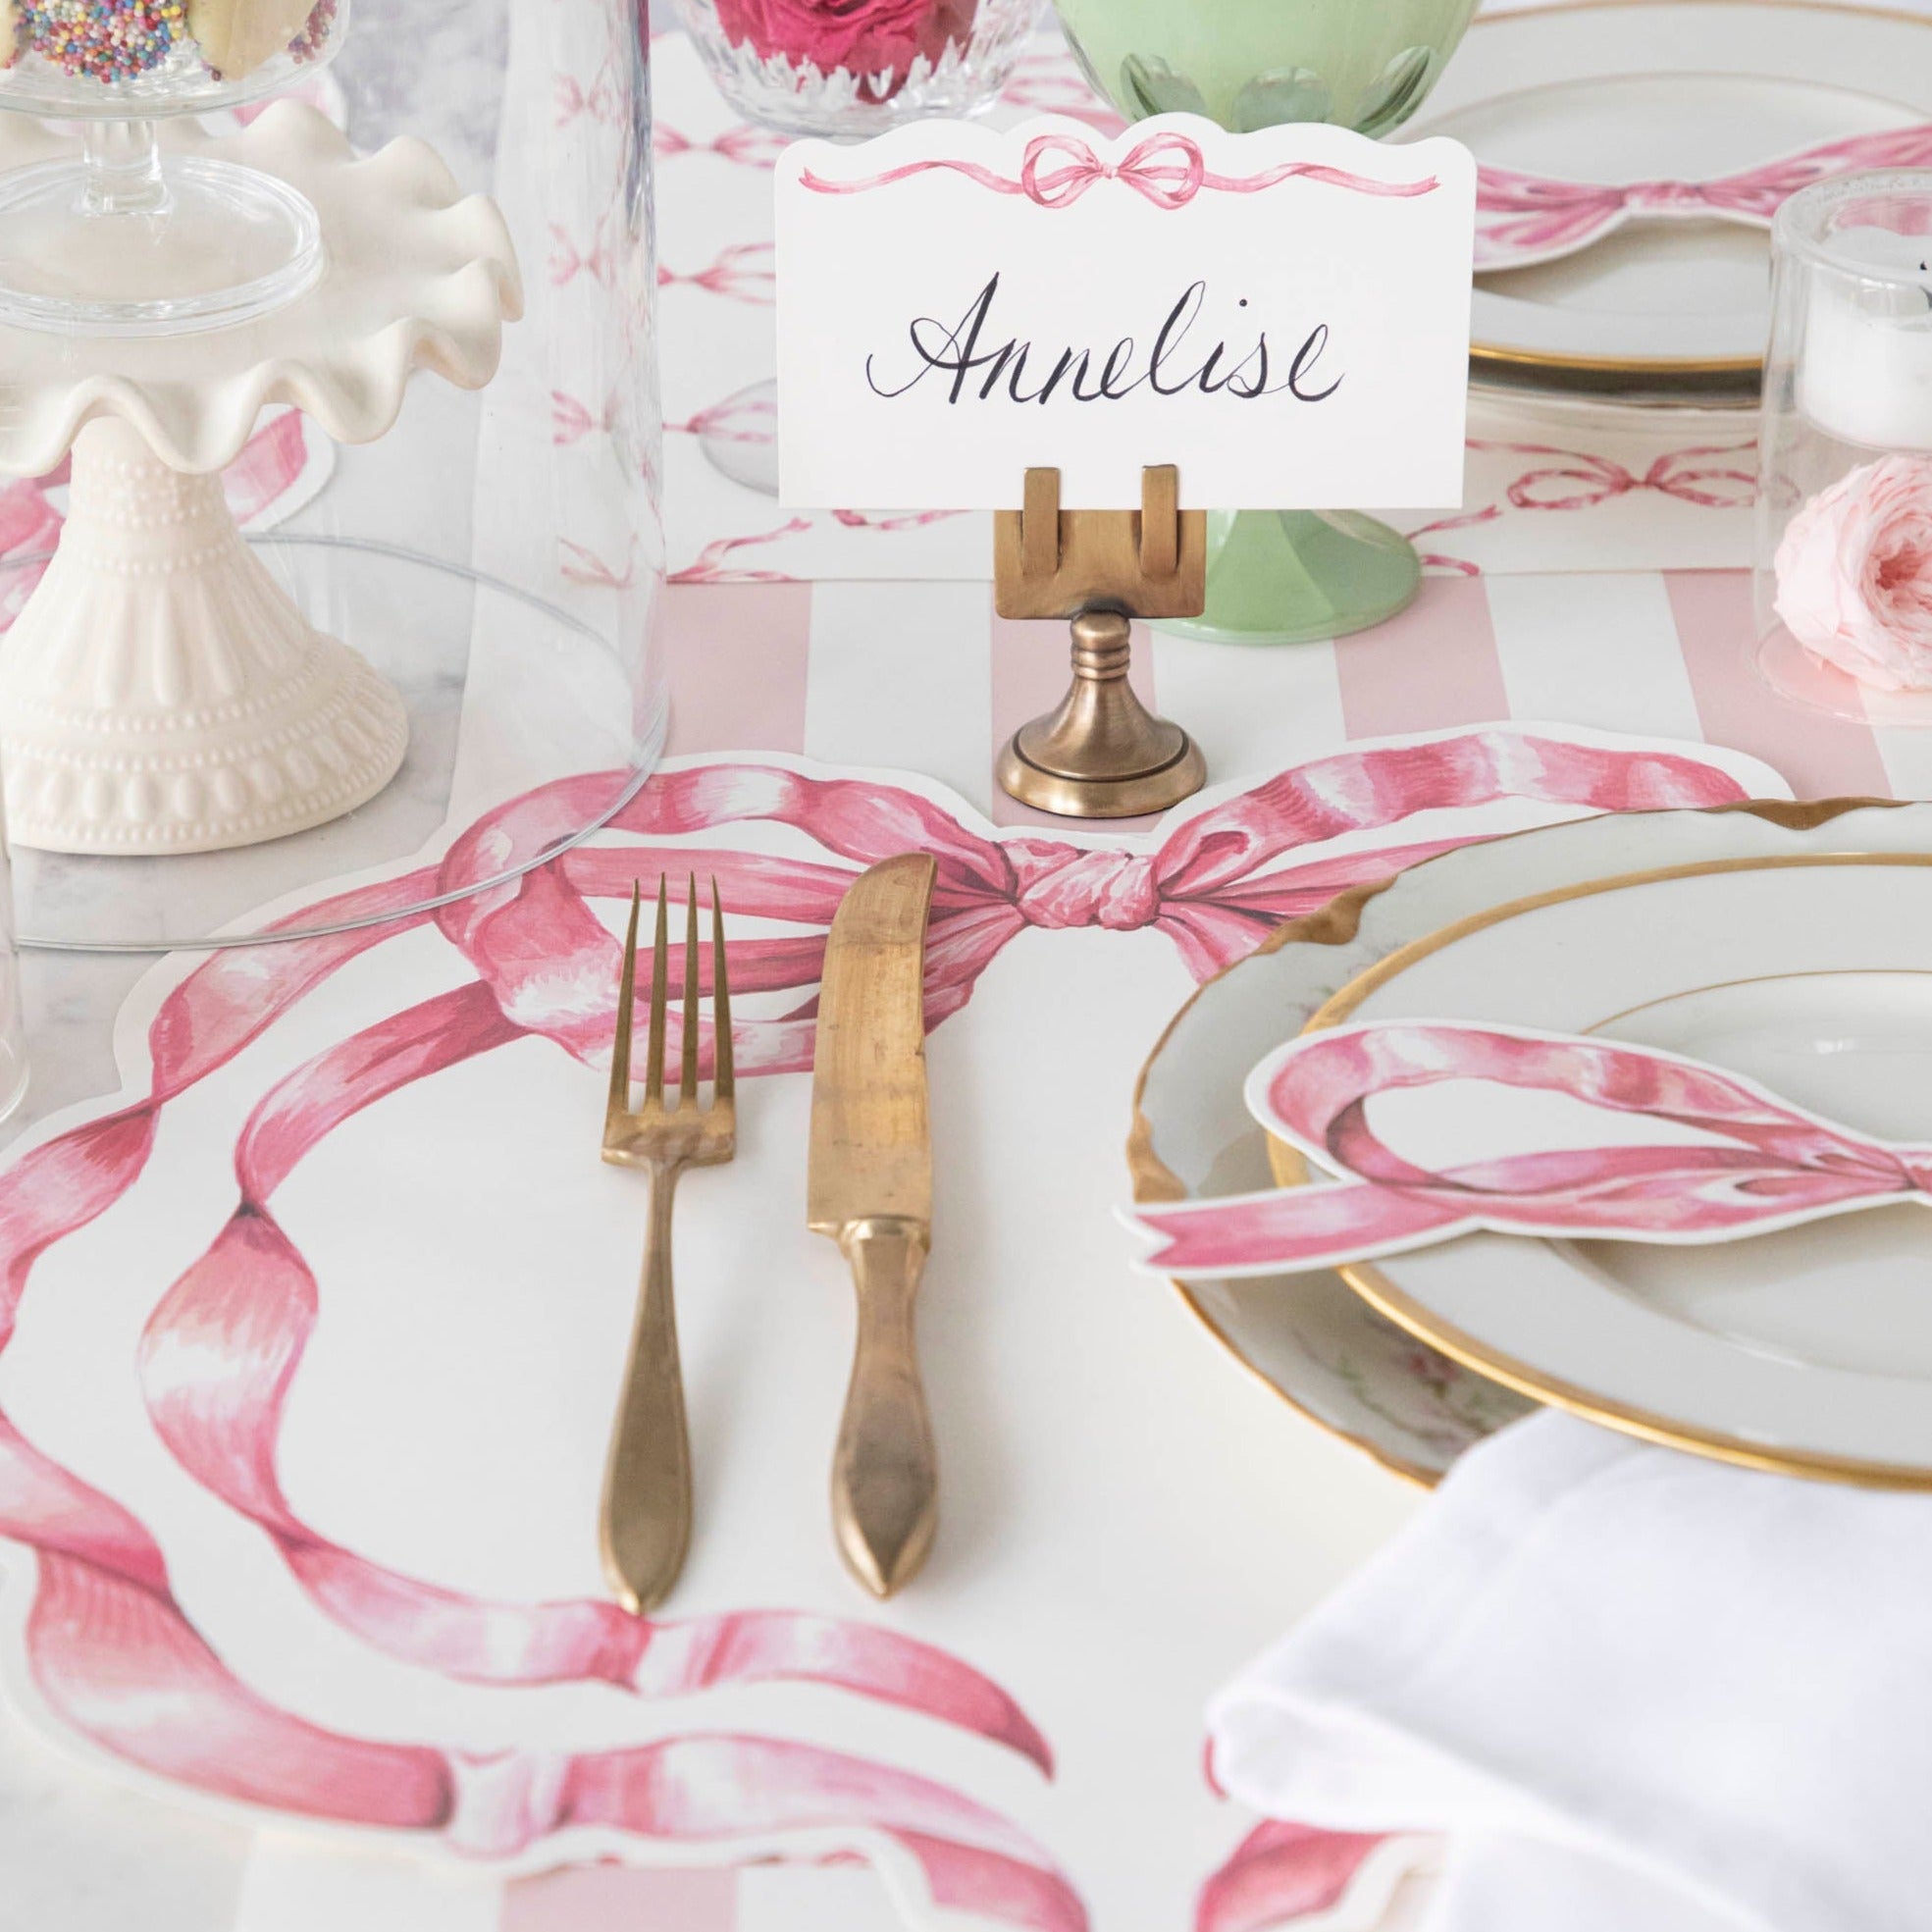 An elegant tablescape featuring a Brass Place Card Holder holding a card reading &quot;Annelise&quot;.